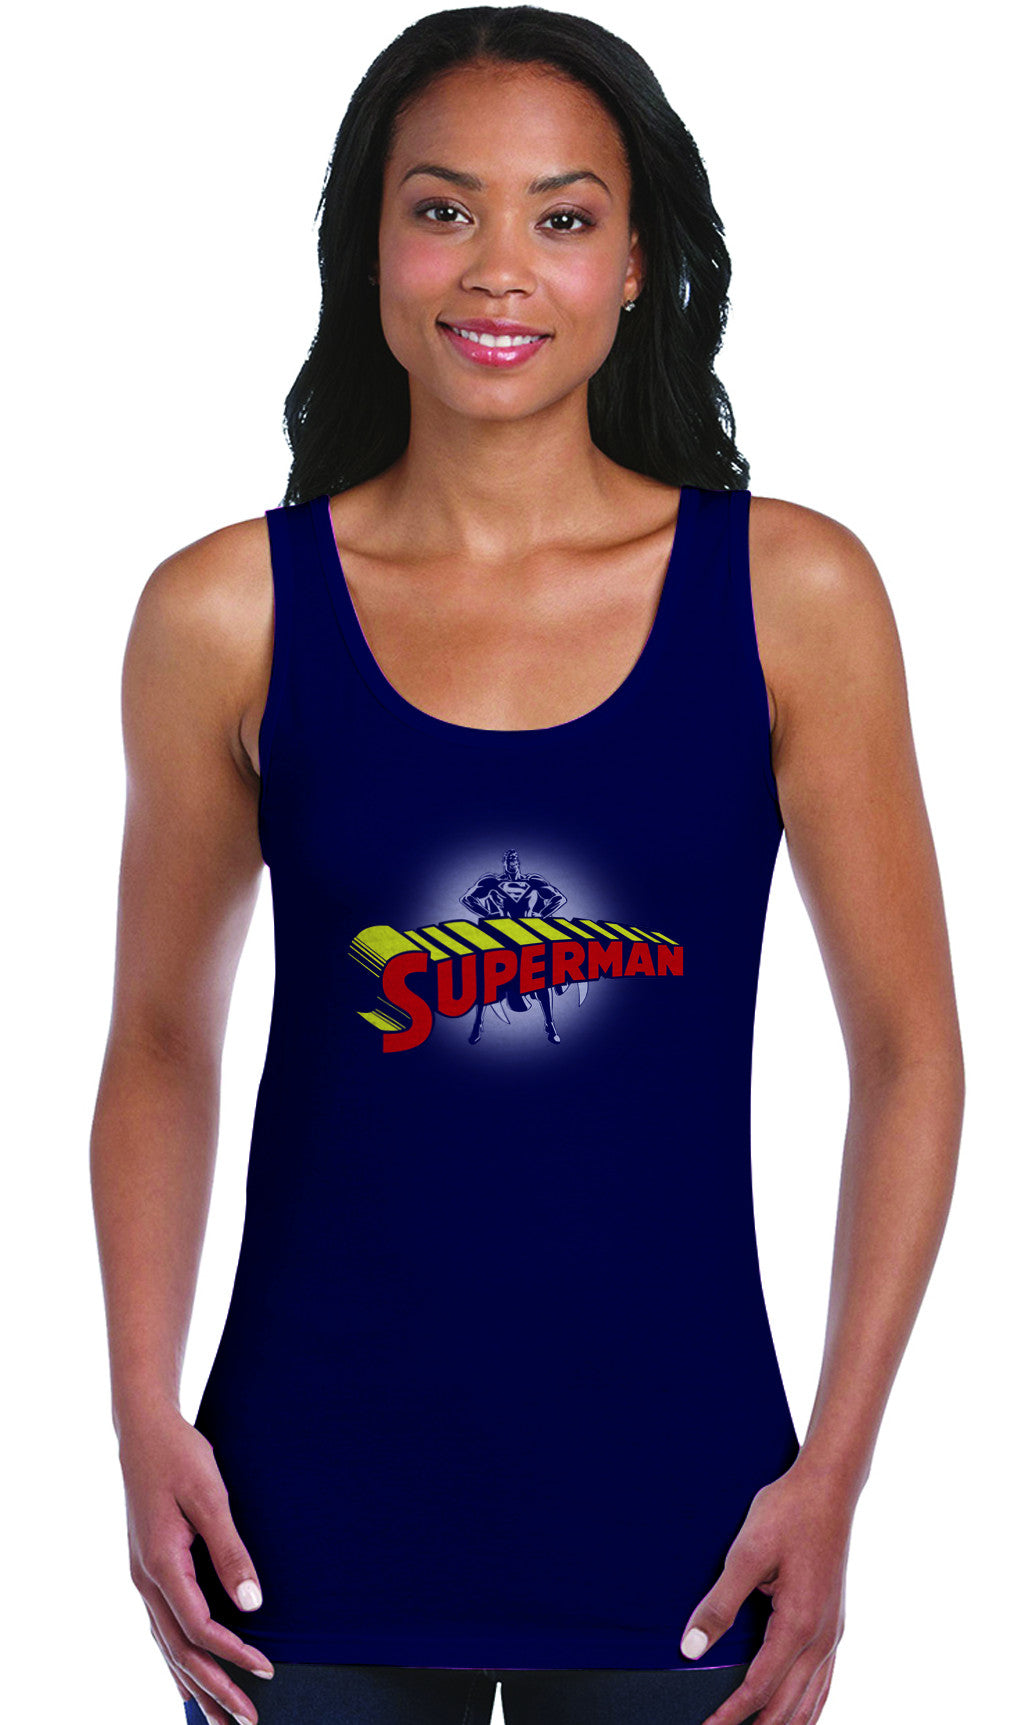 Superman Standing Figure Logo on Navy Fitted Tank top for Women - TshirtNow.net - 1